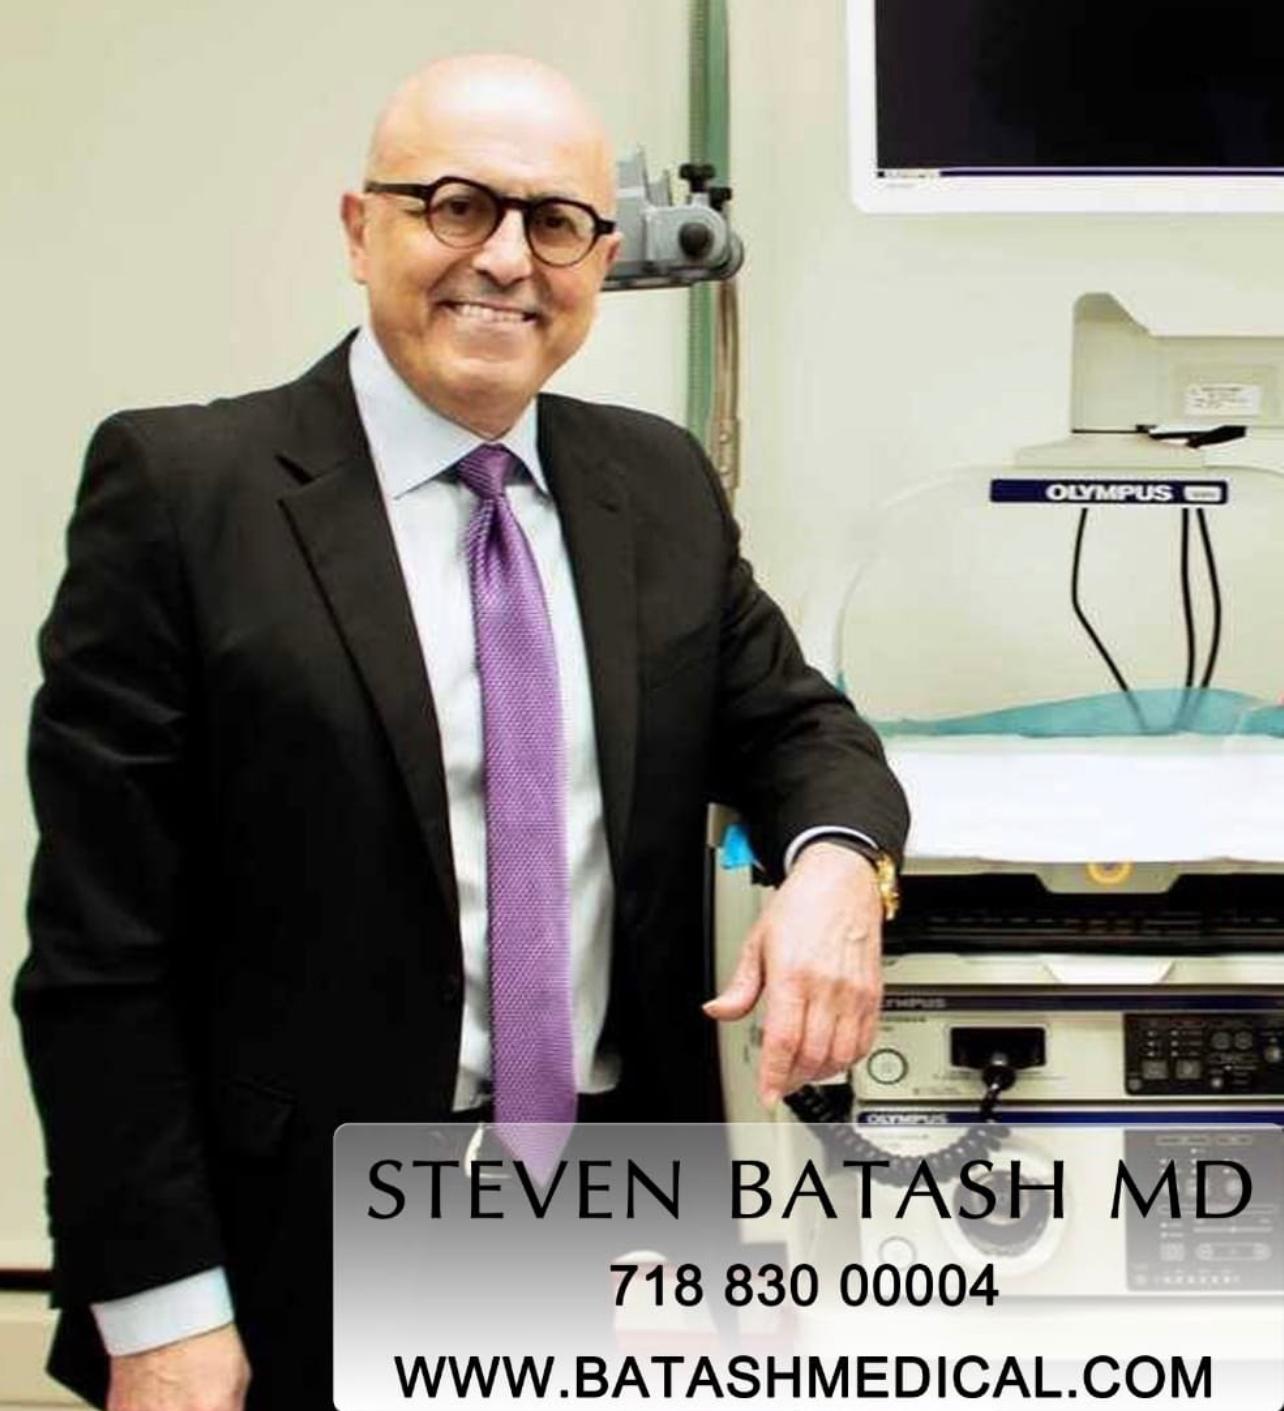 Dr. Steven Batash MD offers custom, non-surgical weight loss solutions with rapid results